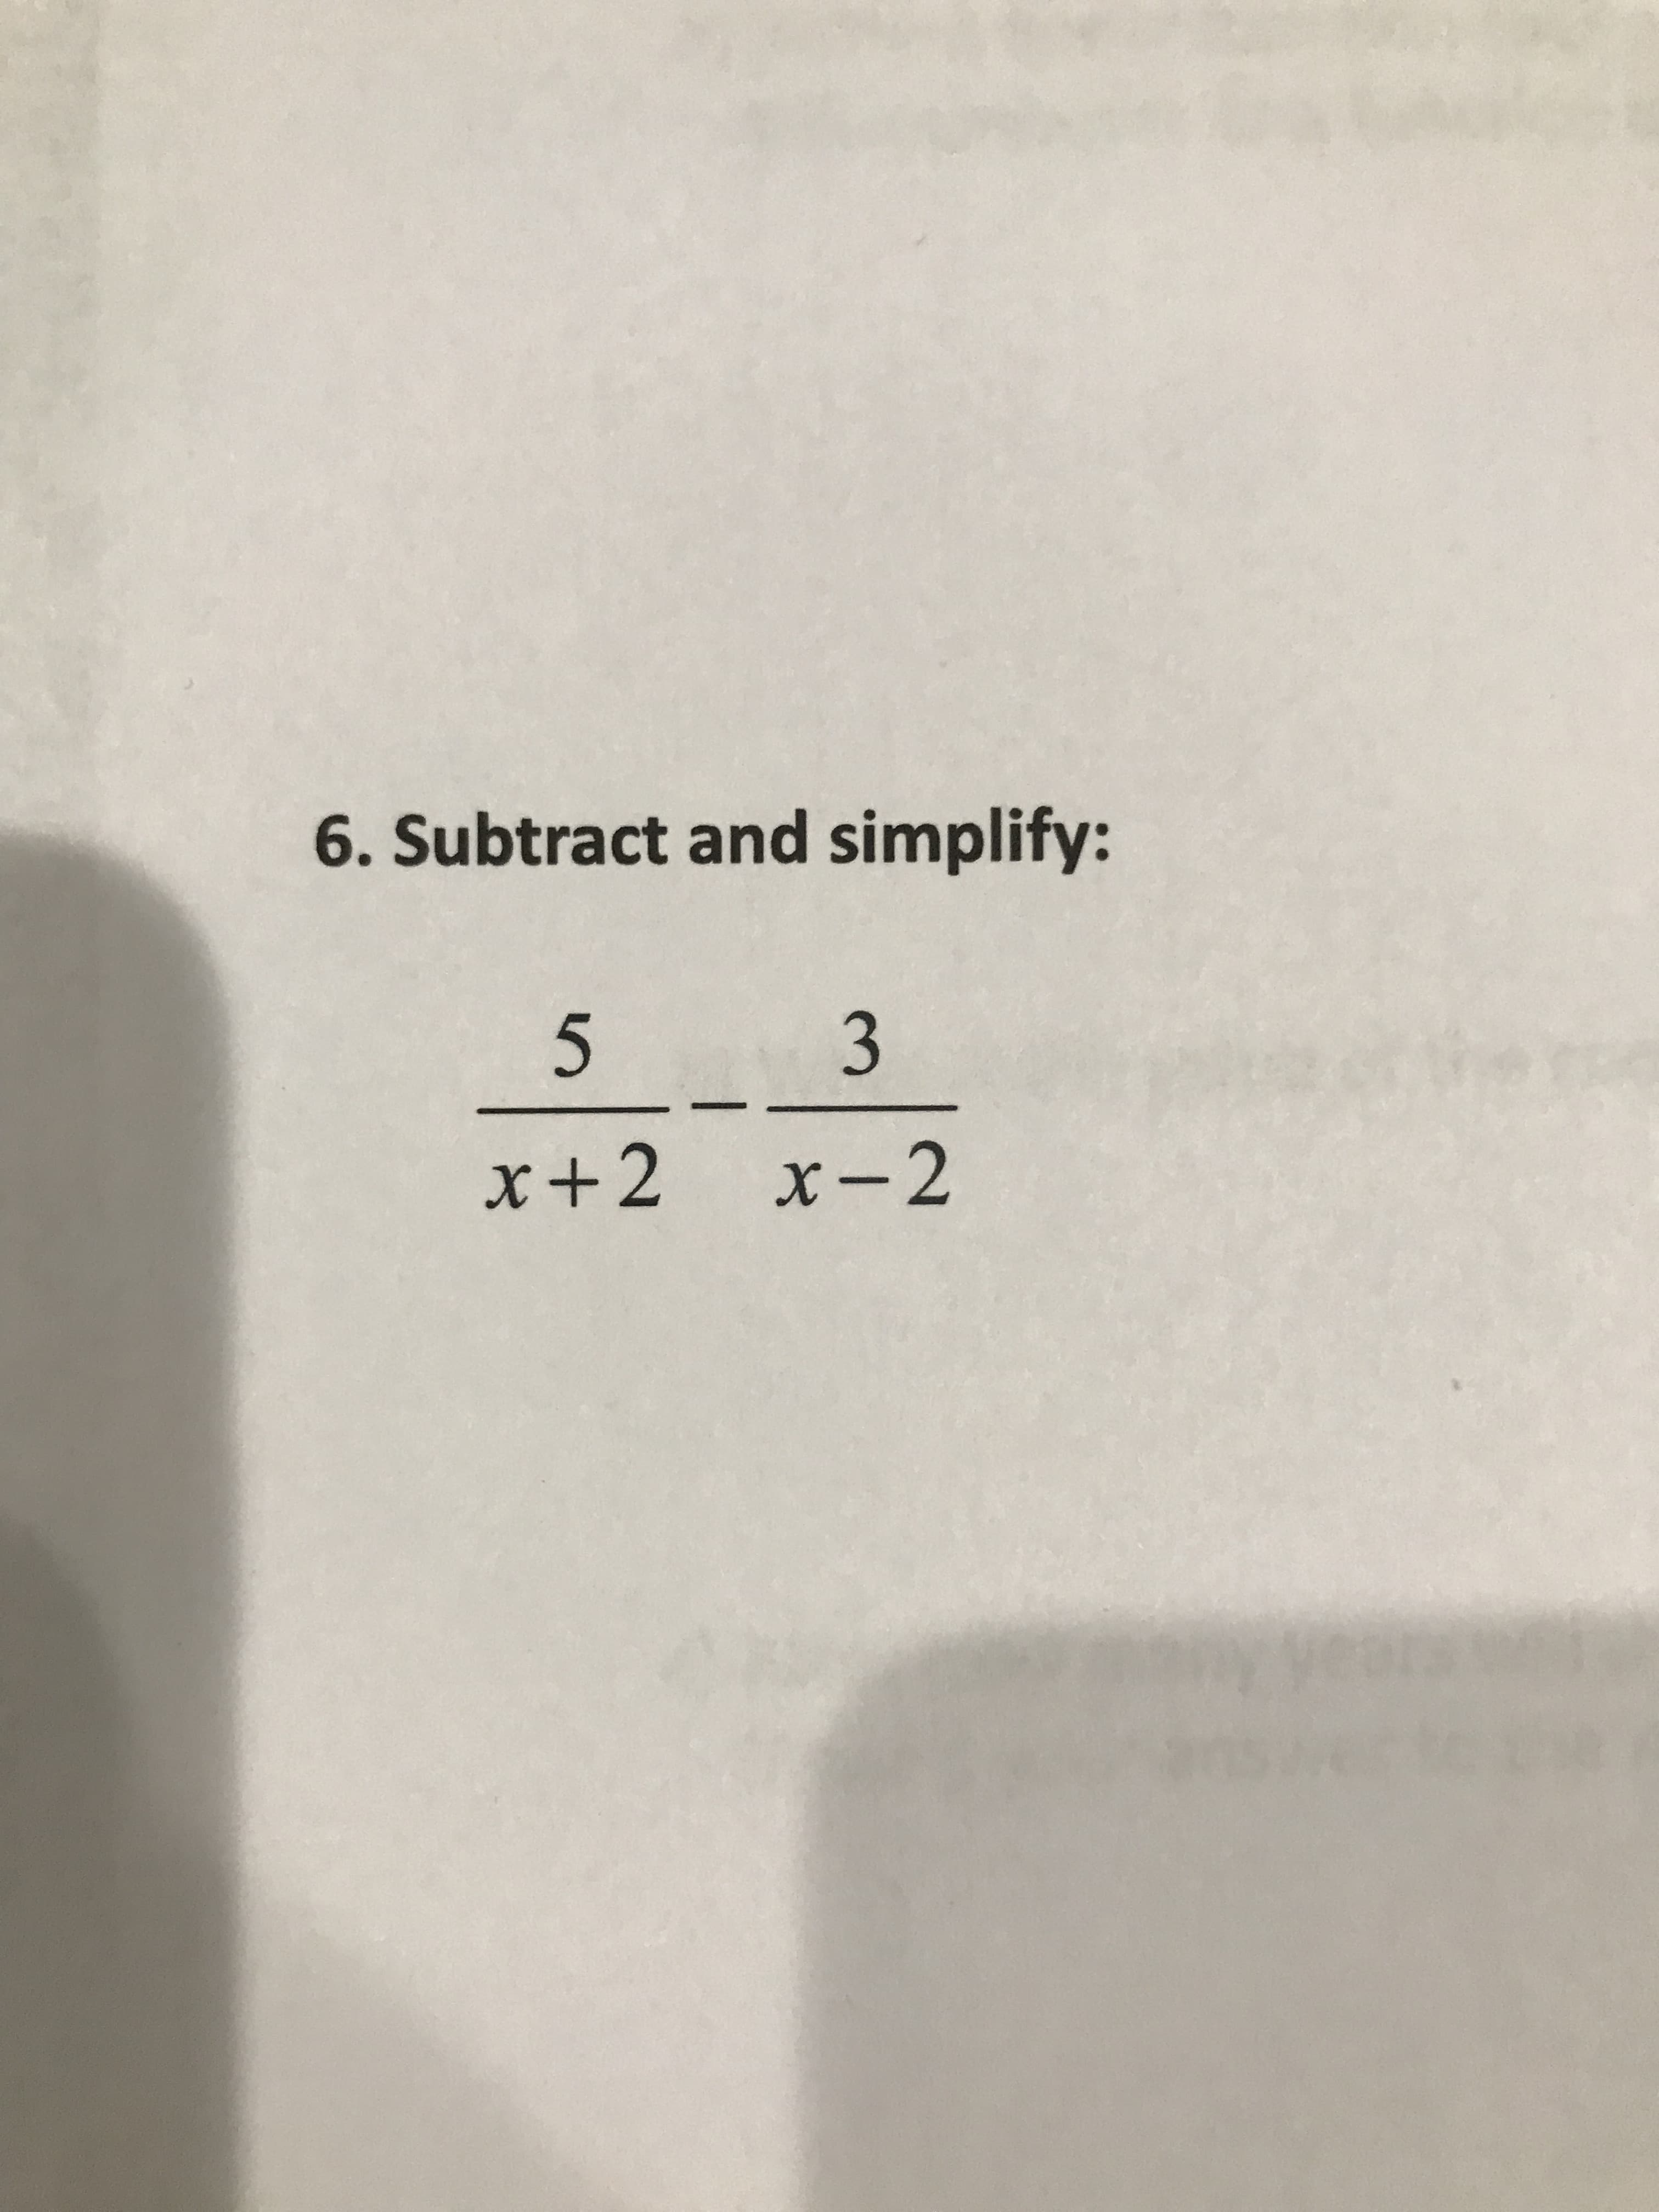 6. Subtract and simplify:
3
x+2
x-2
